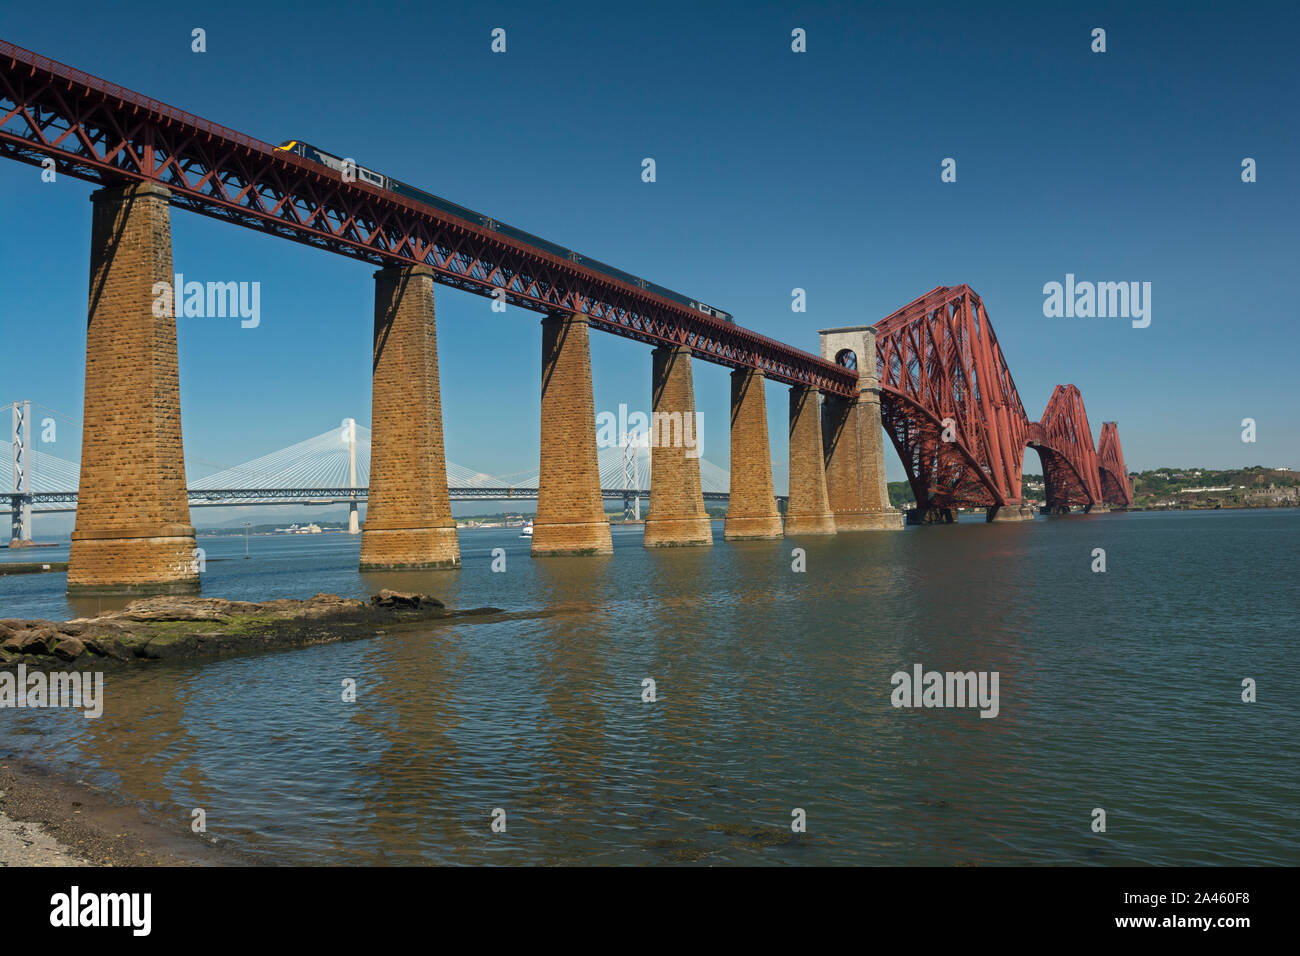 The Forth Rail Bridge and two Forth Road Bridges over the River Forth, Scotland Stock Photo